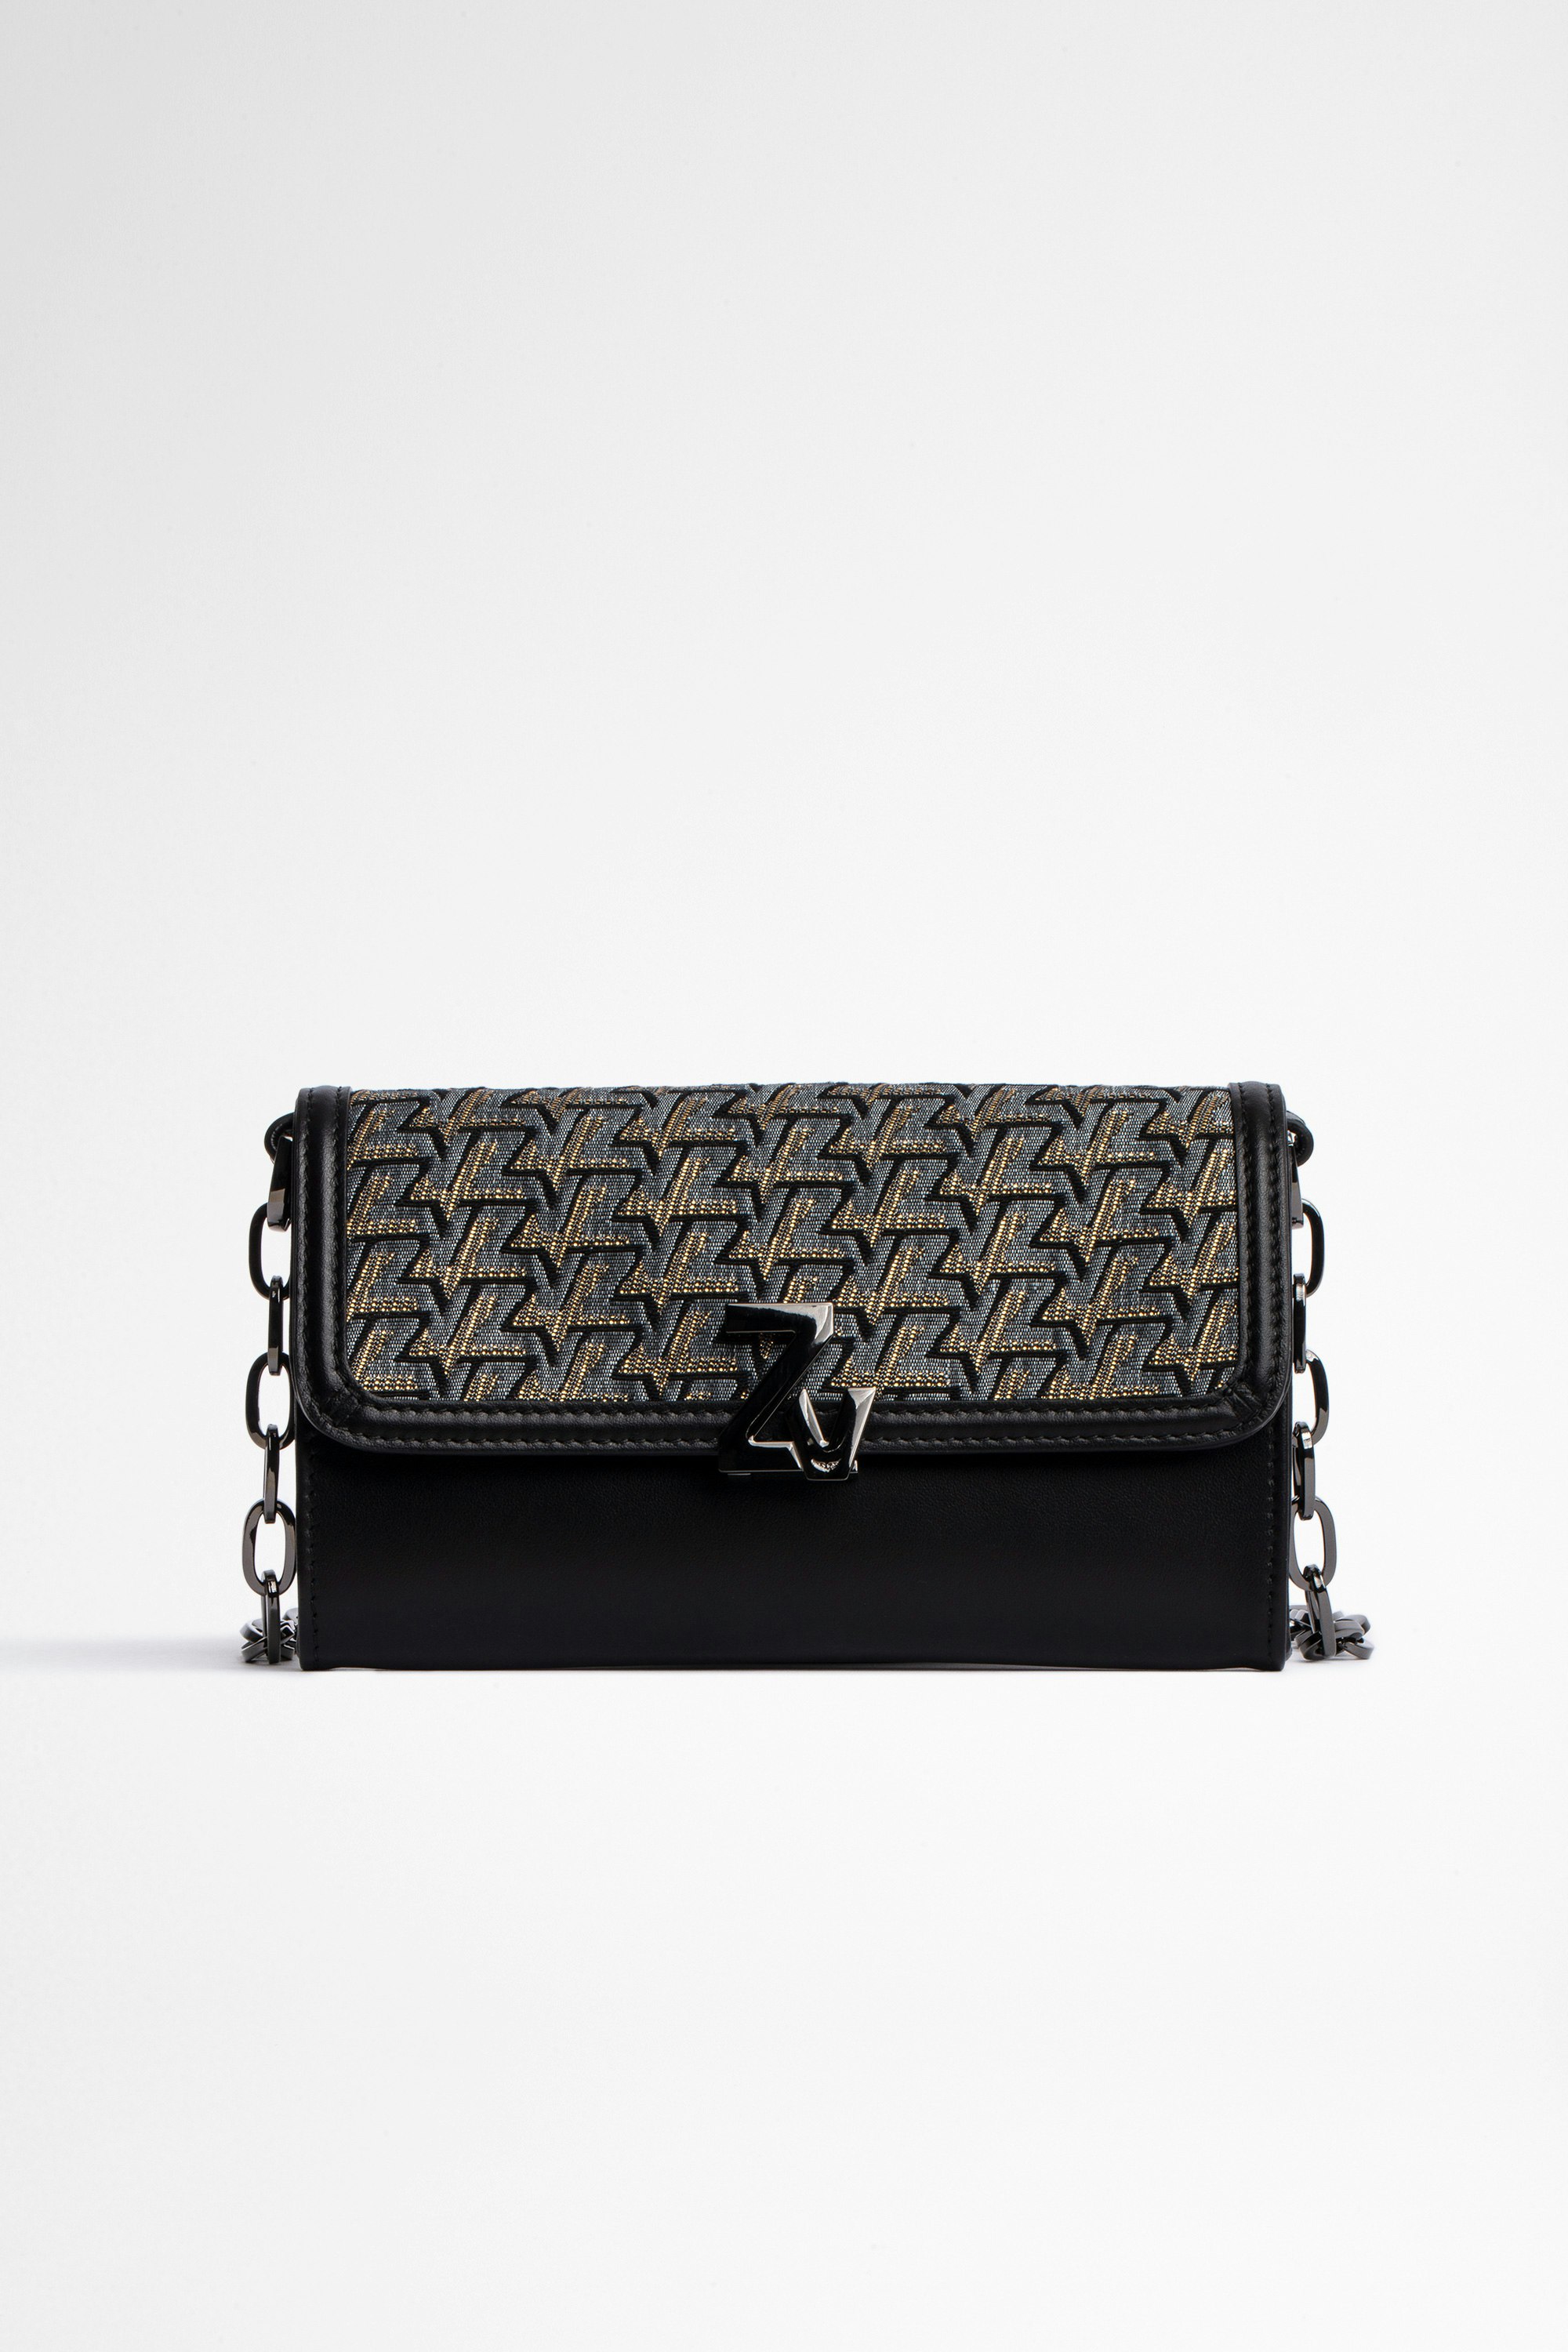 ZV Initiale Le Long Unchained Wallet-Style Clutch Women's ZV Initiale black leather wallet with chain and street jacquard